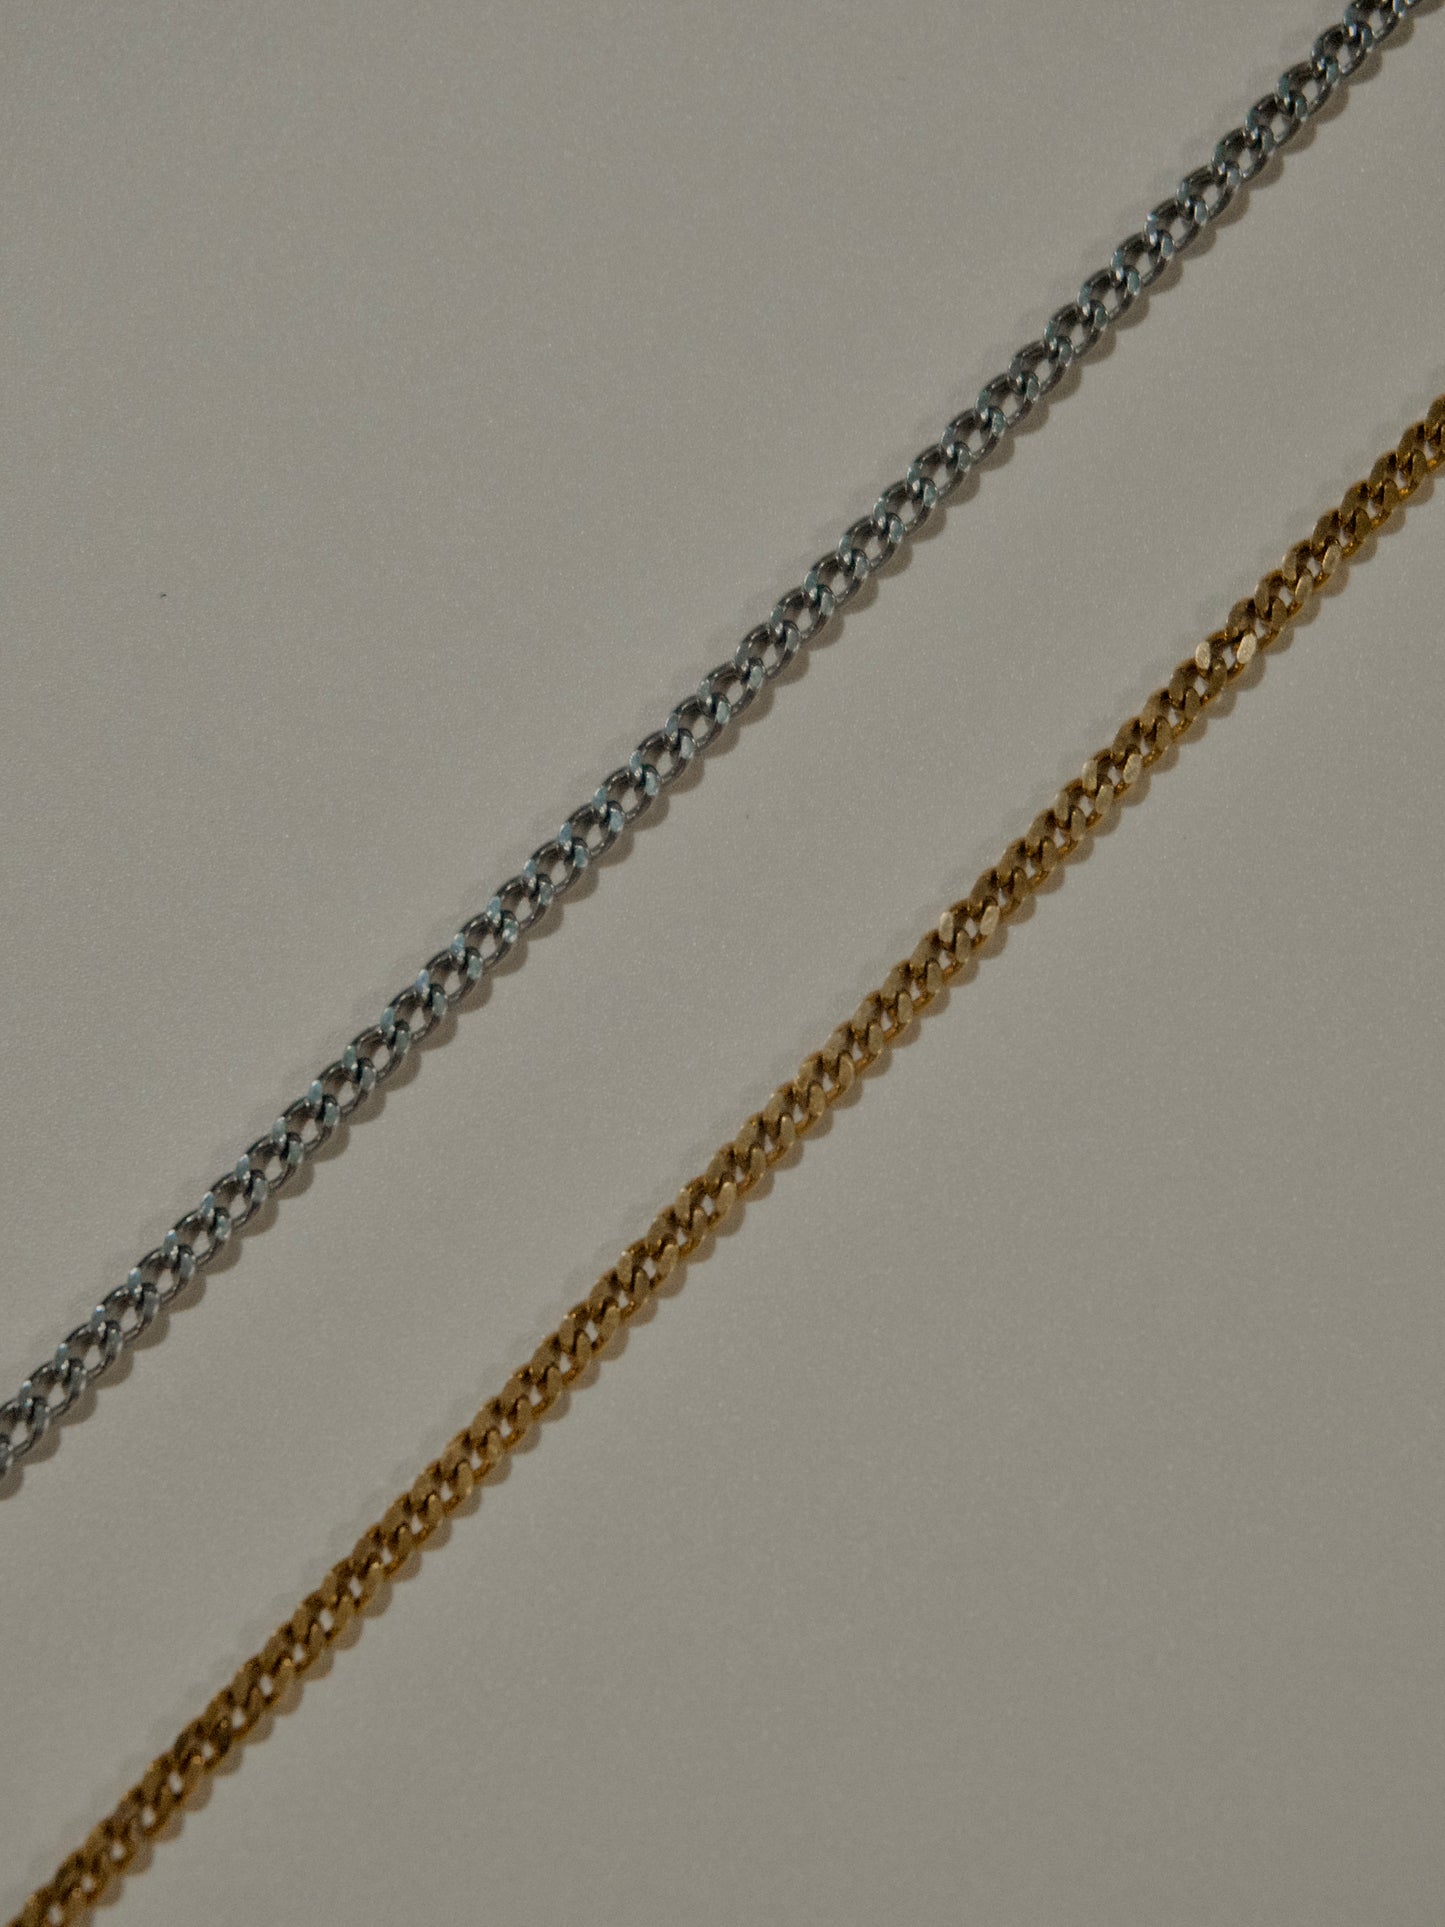 Basic 3mm Curb Chain Necklace